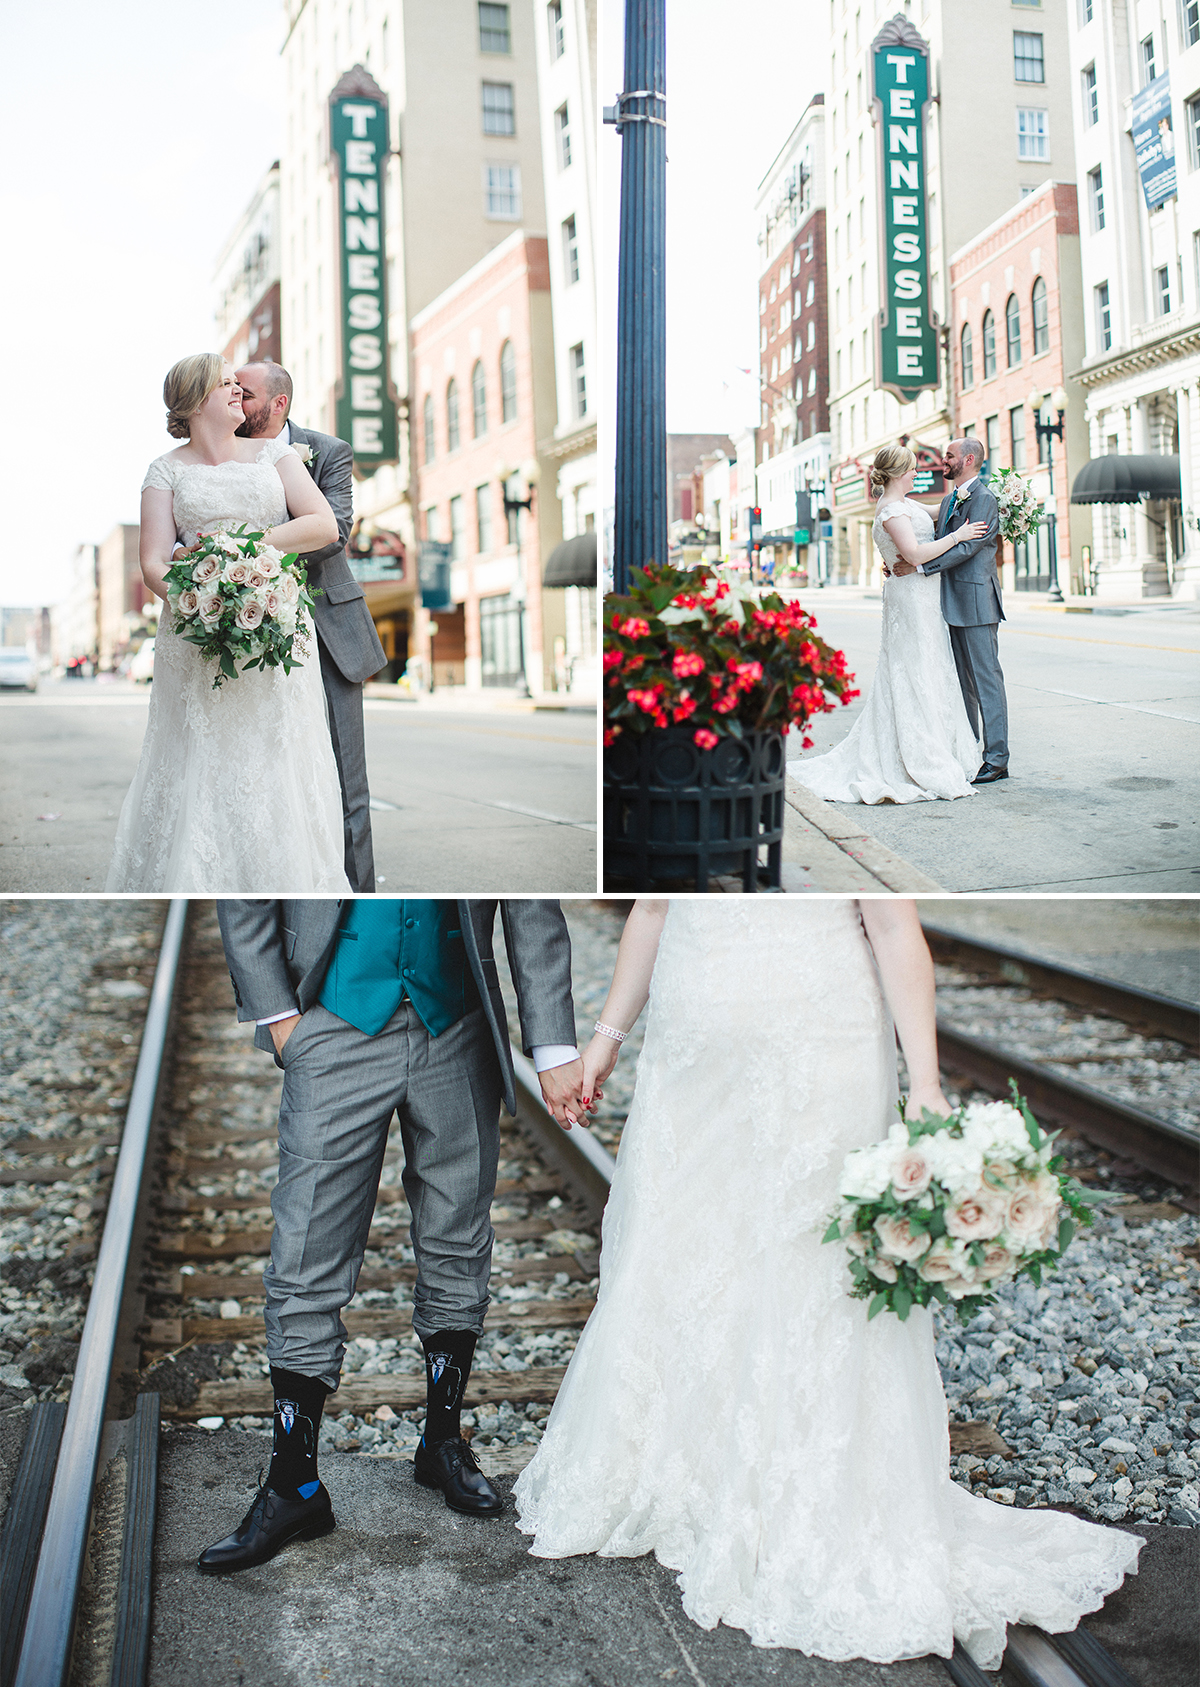 Intimate Knoxville, Tennessee Wedding - Izzy Hudgins Photography - Knoxville Wedding Photographer - Downtown Knoxville